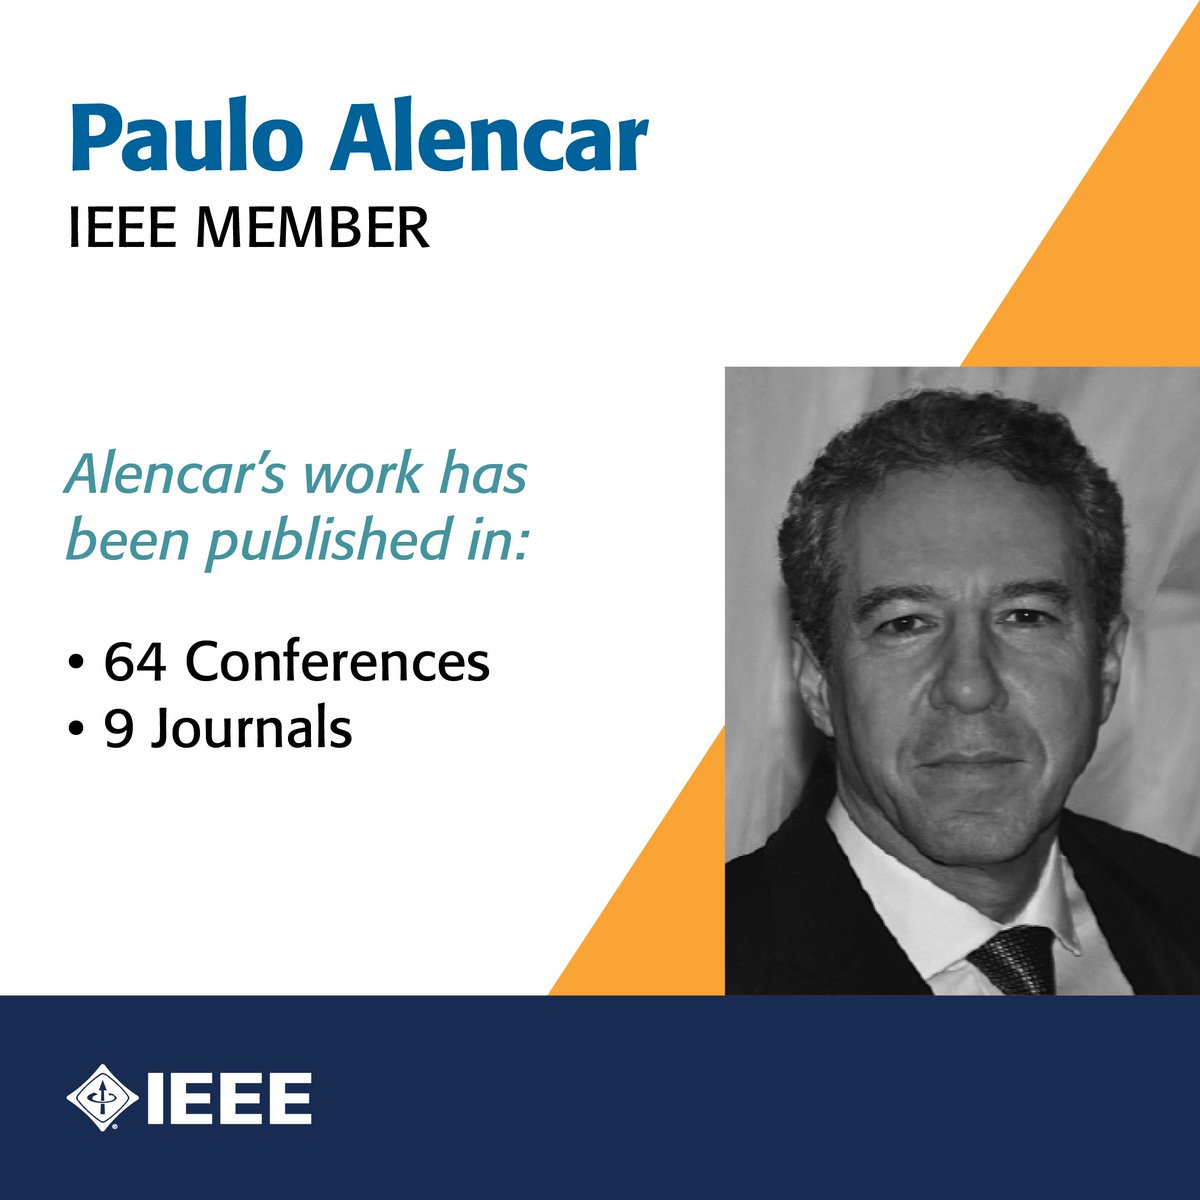 #IEEE Member Paulo Alencar is a Featured Author recognized for his research contributions to information technology and software engineering. Since 1995, Alencar has had 73 articles published and 270 citations. Learn more about Alencar on @IEEEXplore: bit.ly/3QzzQnO